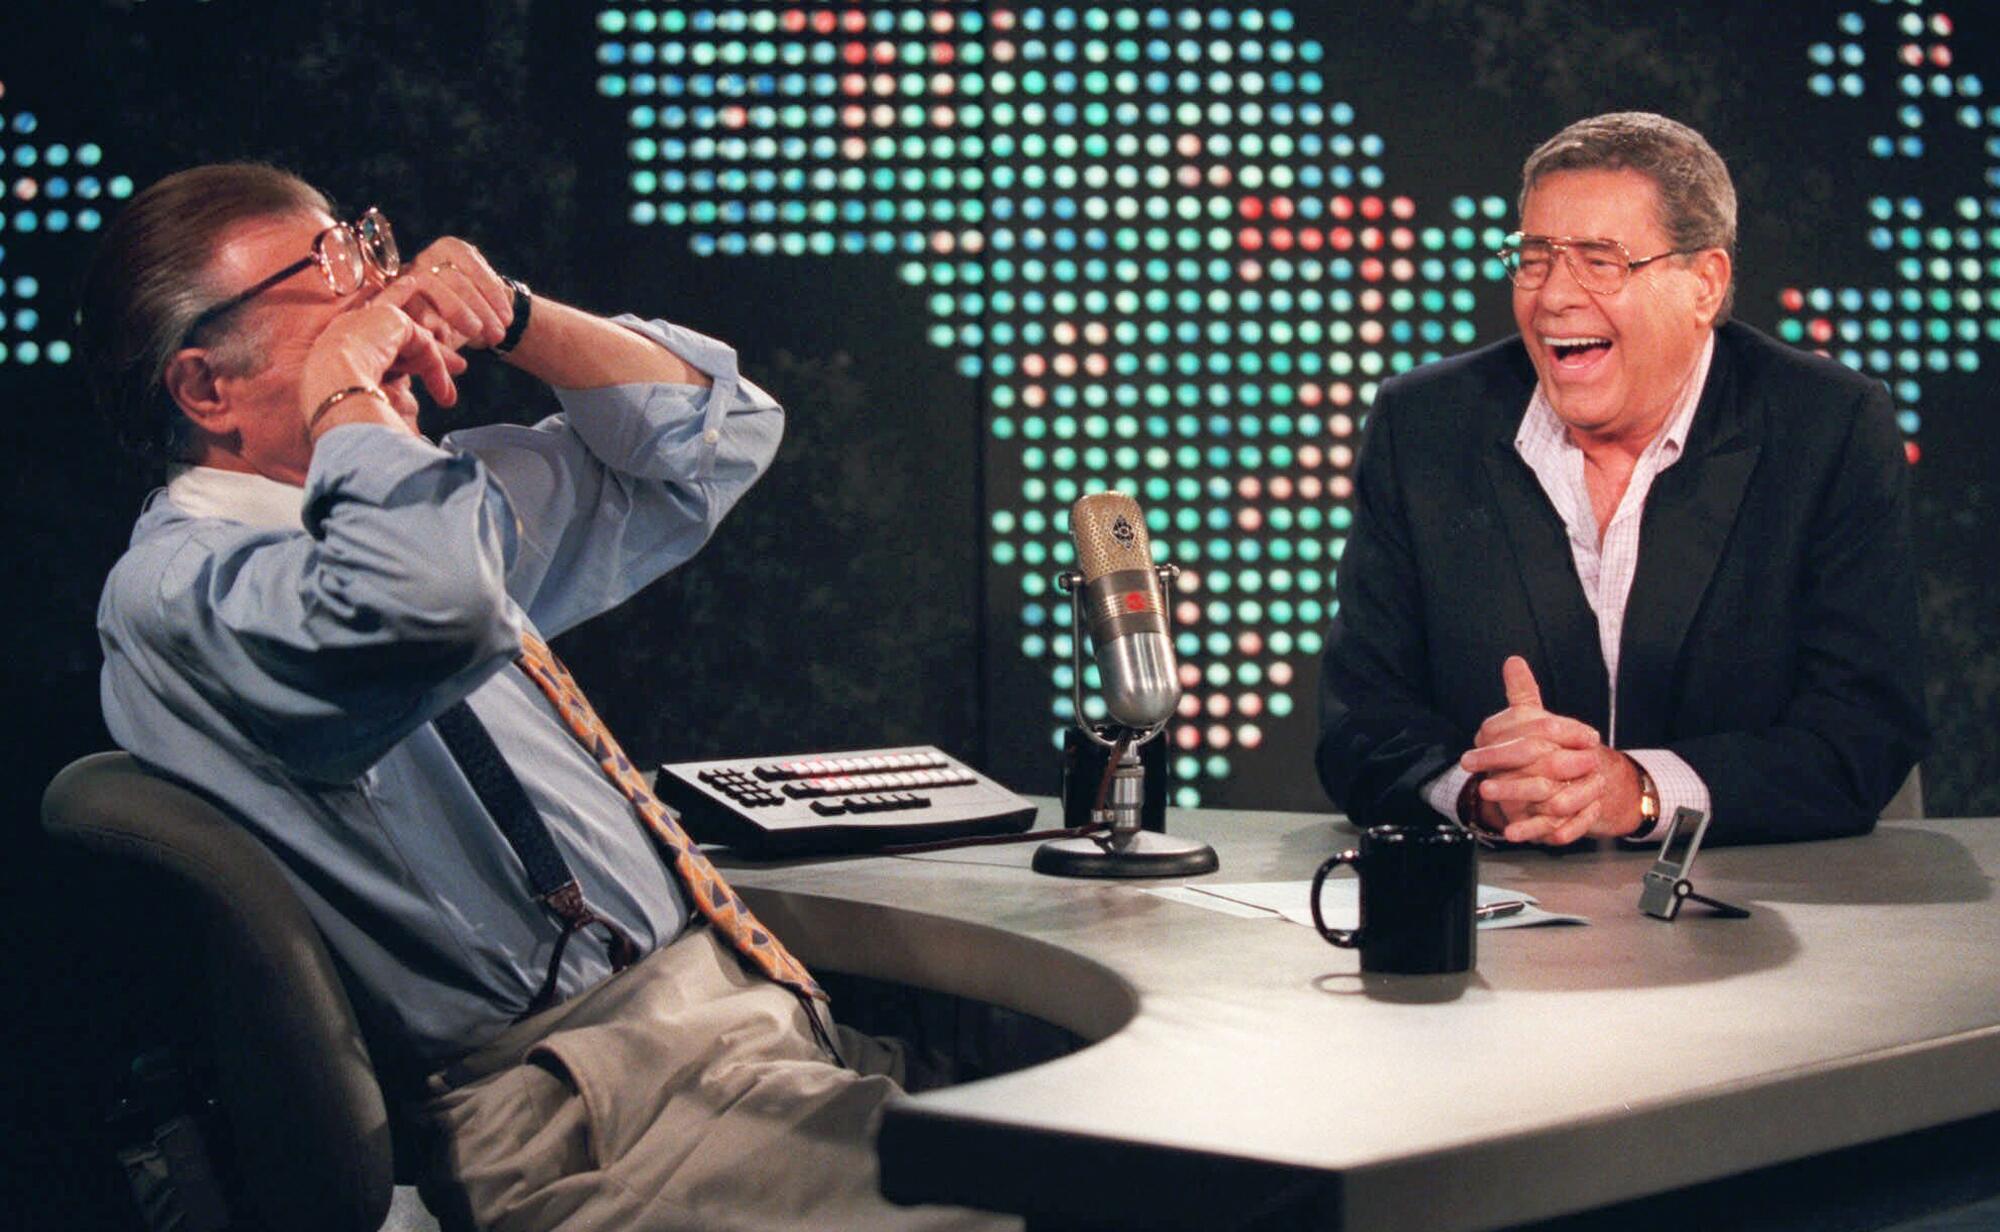 Talk show host Larry King wipes his eyes while laughing at a joke by comedy legend Jerry Lewis on set of "Larry King Live."